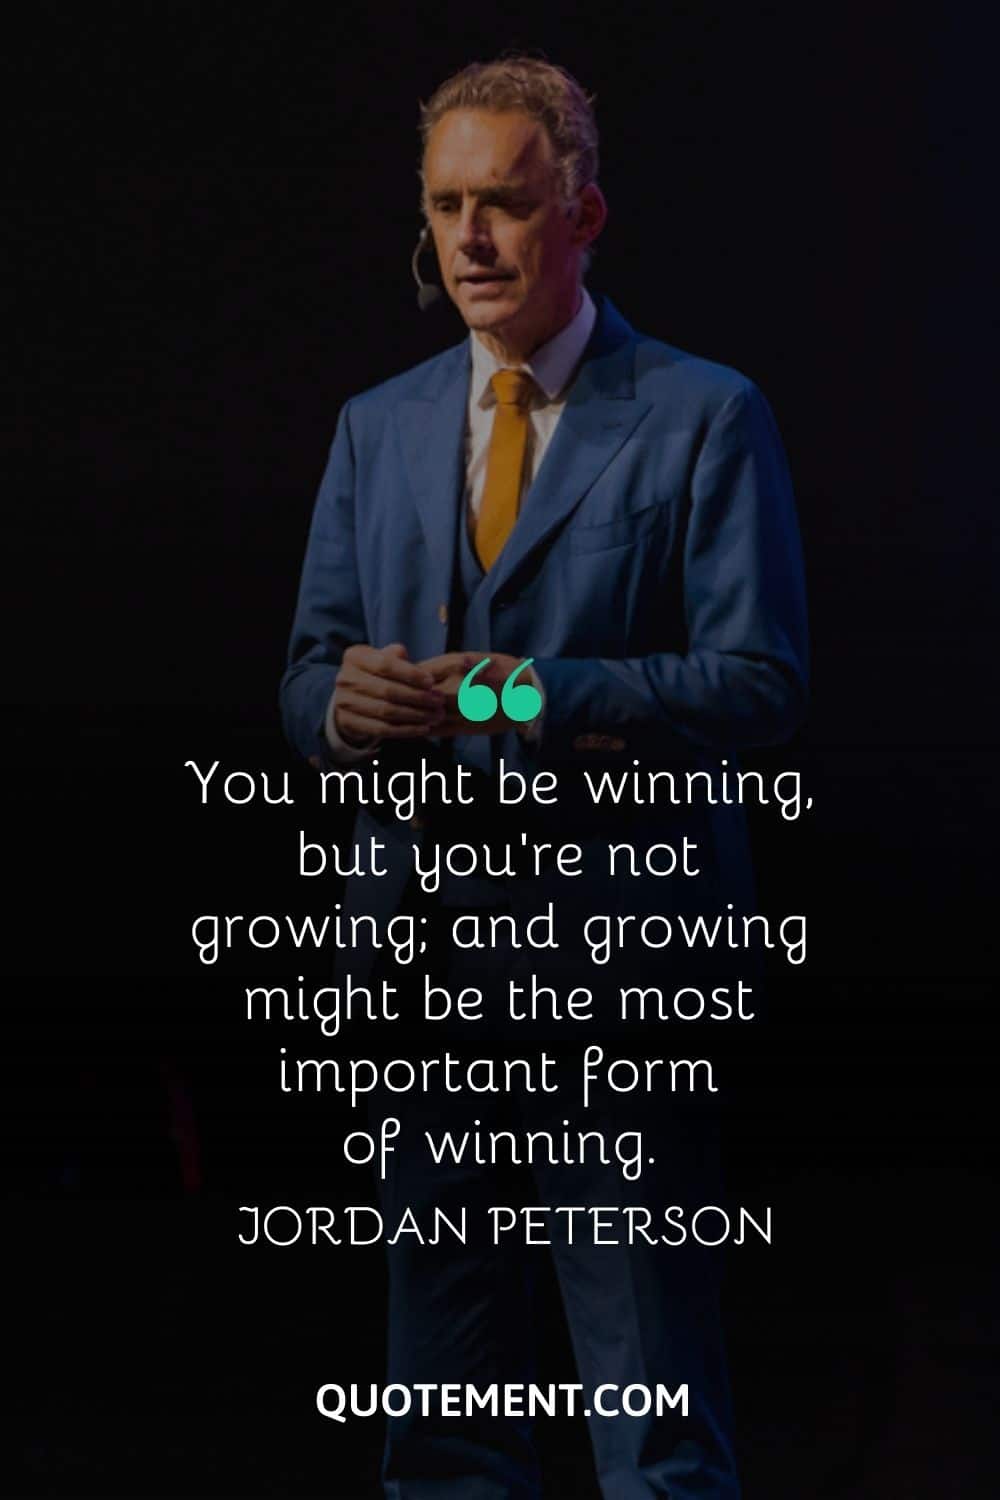 “You might be winning, but you’re not growing; and growing might be the most important form of winning.” — Jordan Peterson